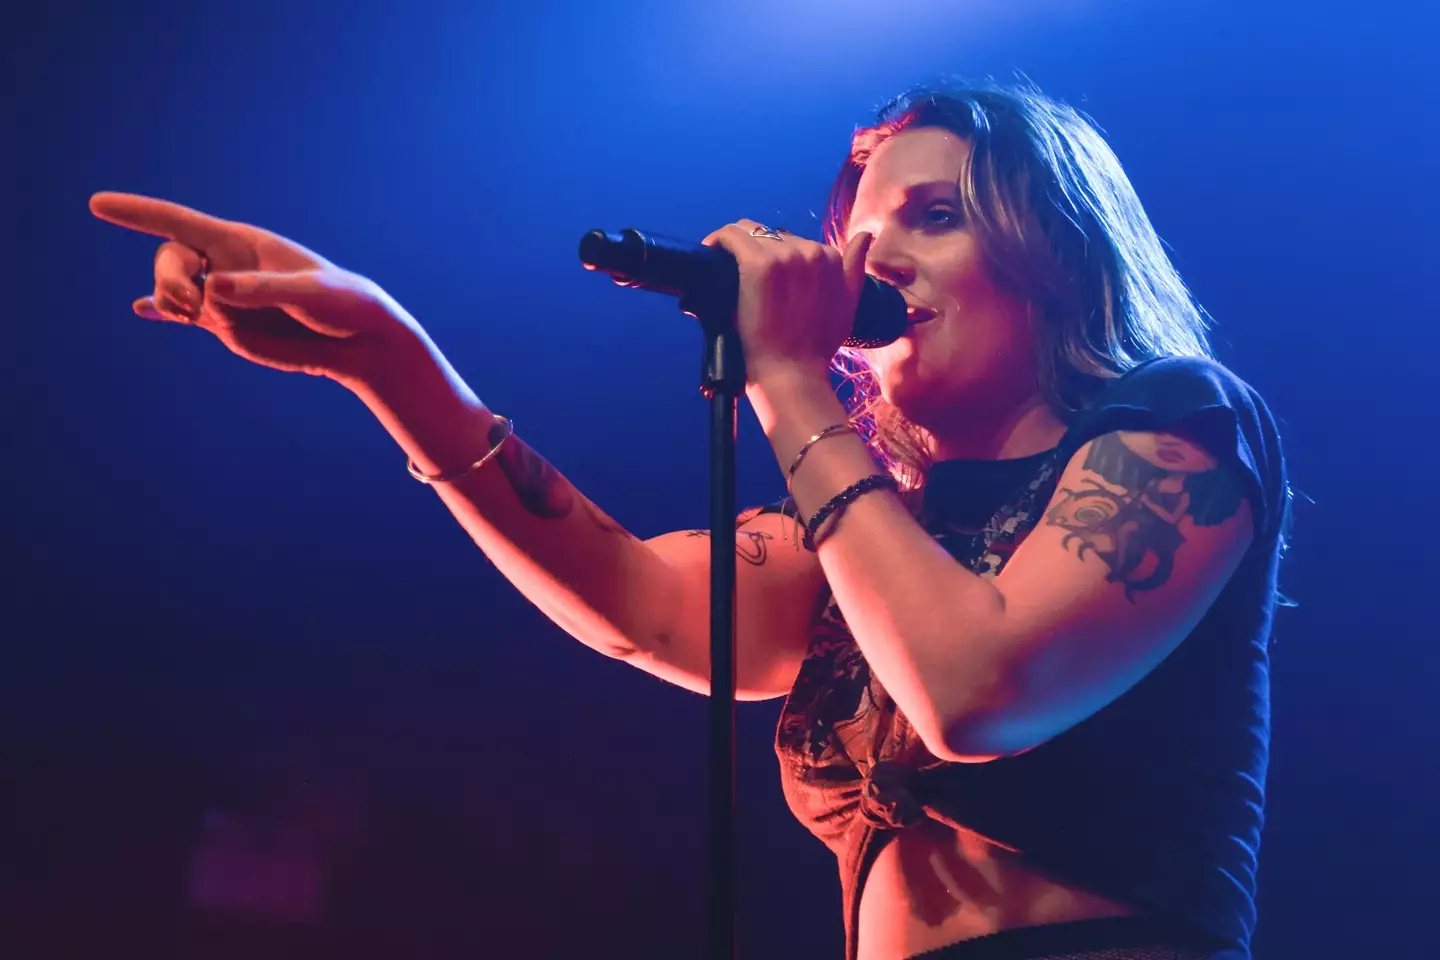 Tove Lo has spoken out about how to properly pronounce her name.